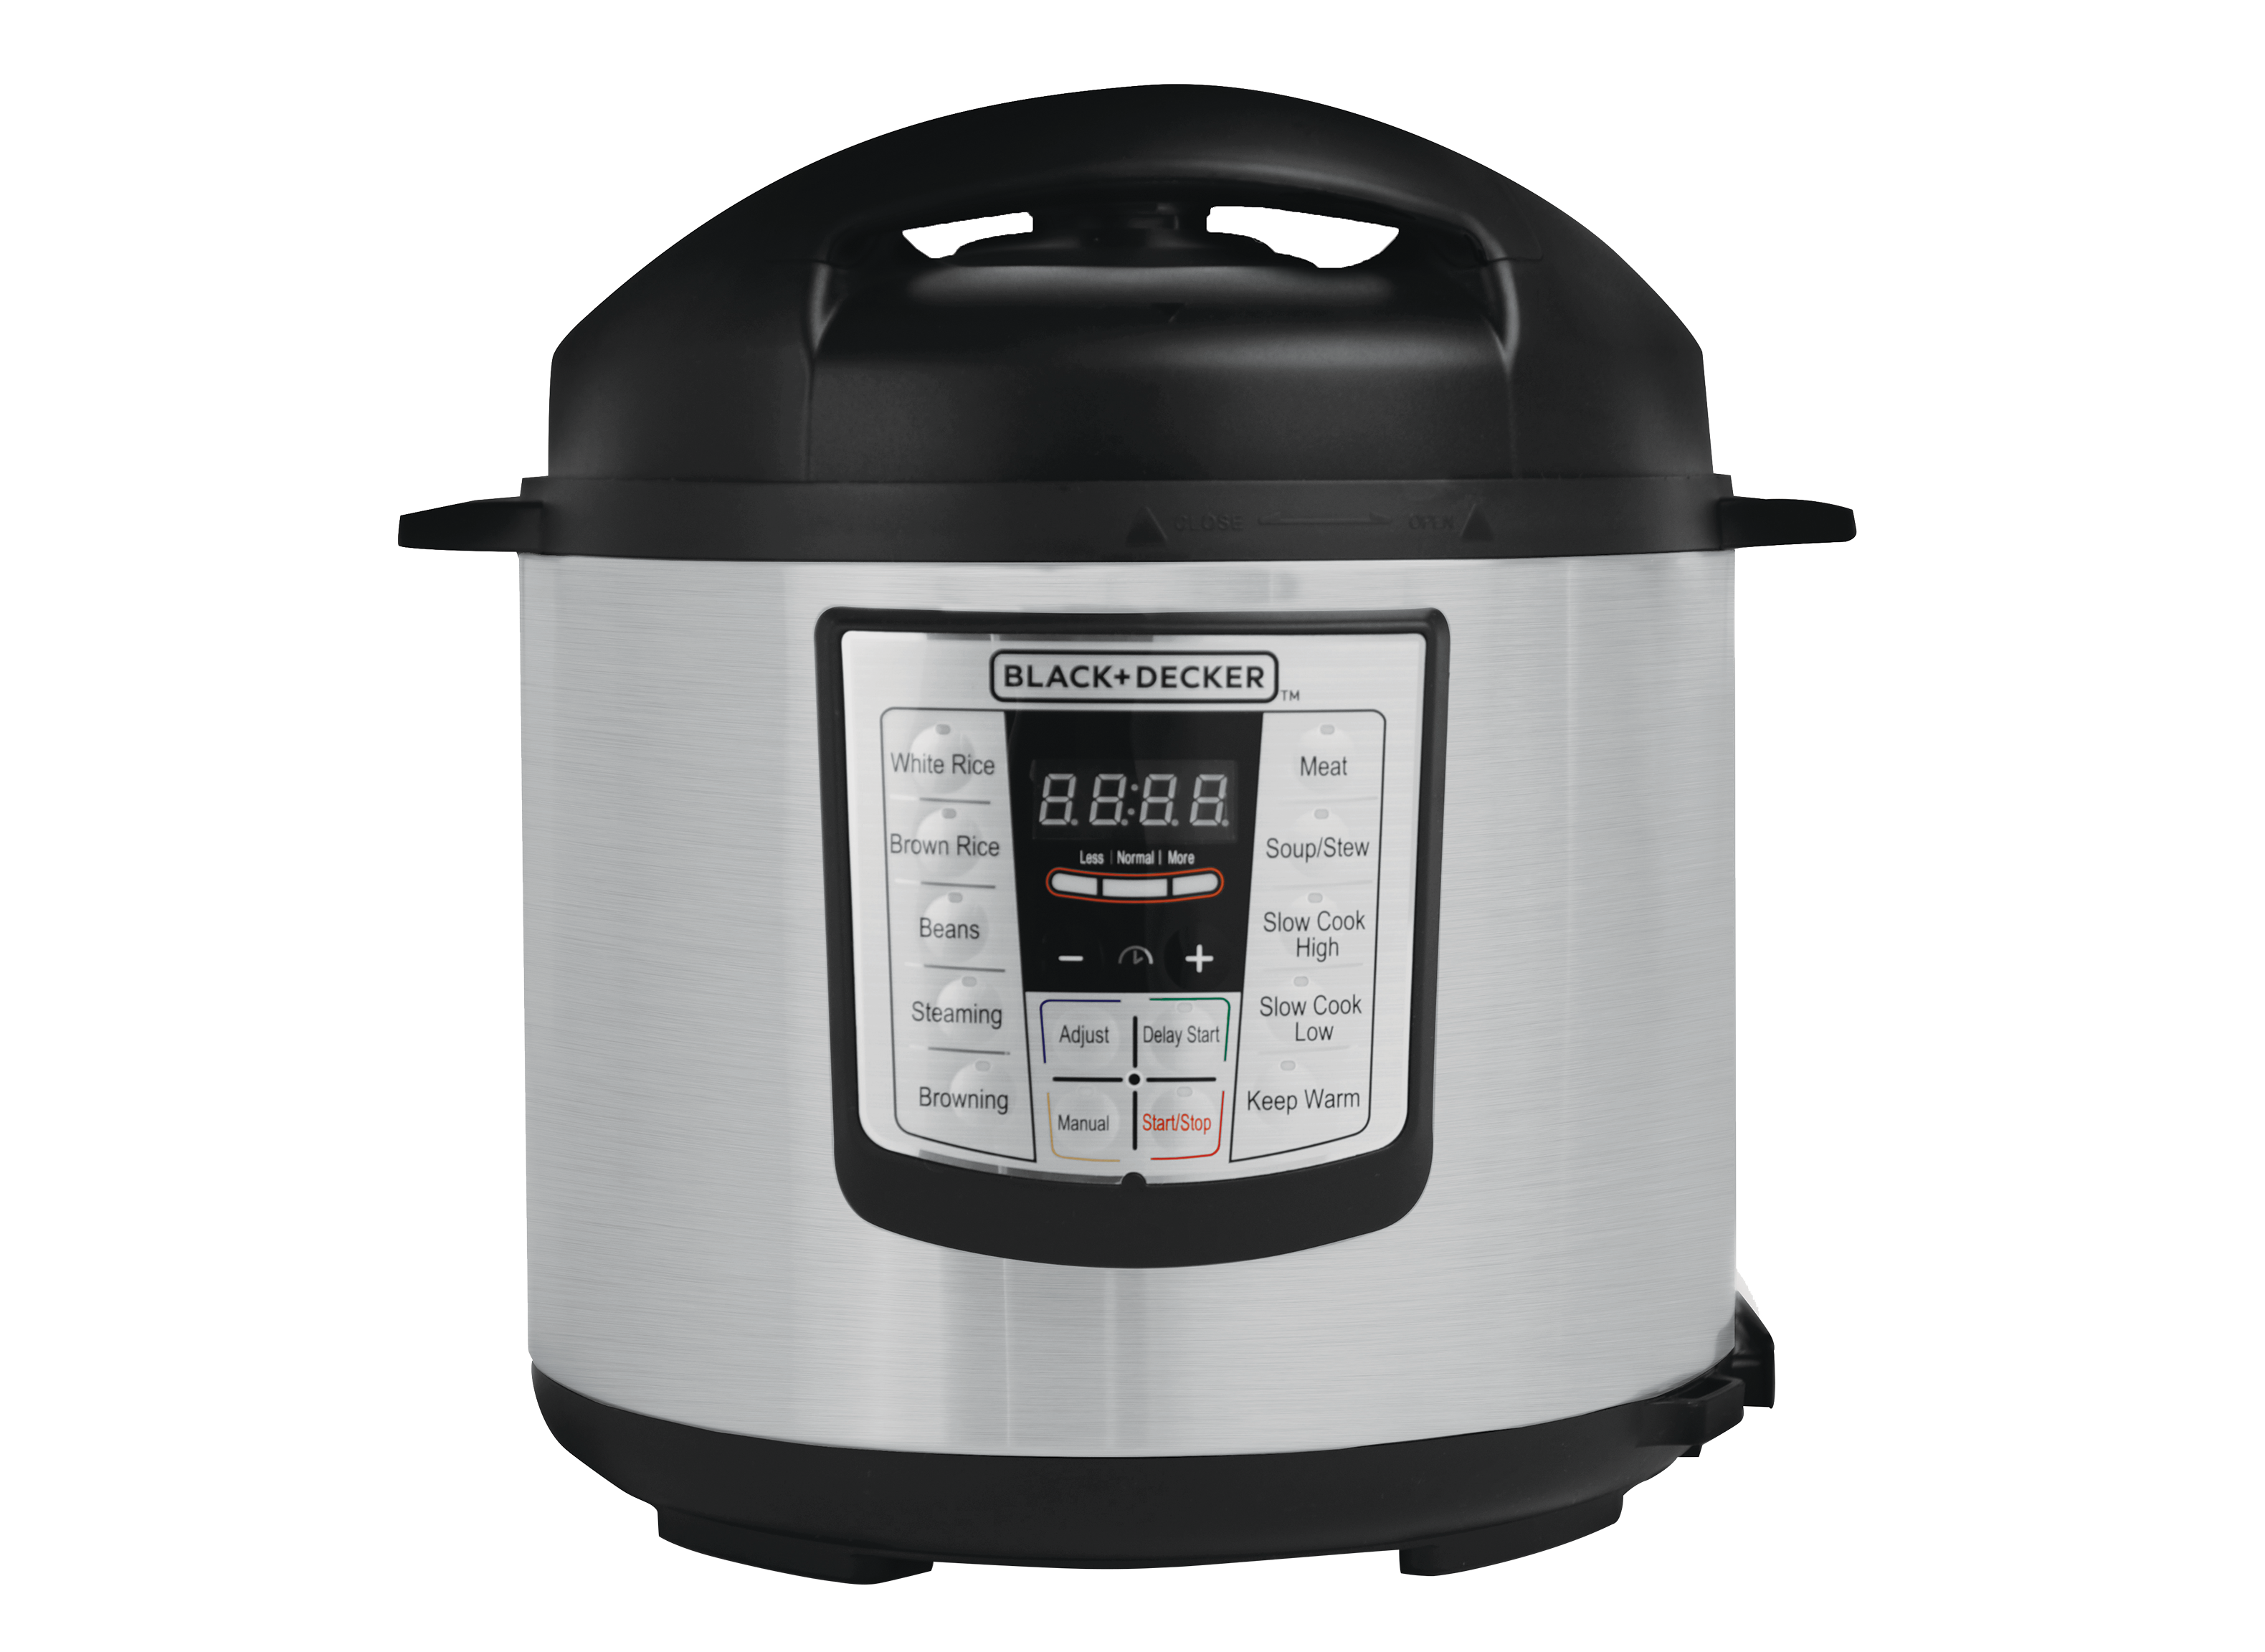 https://crdms.images.consumerreports.org/prod/products/cr/models/400774-with-pressure-cooking-mode-black-decker-pr100-11-in-1-cooking-pot-10011135.png